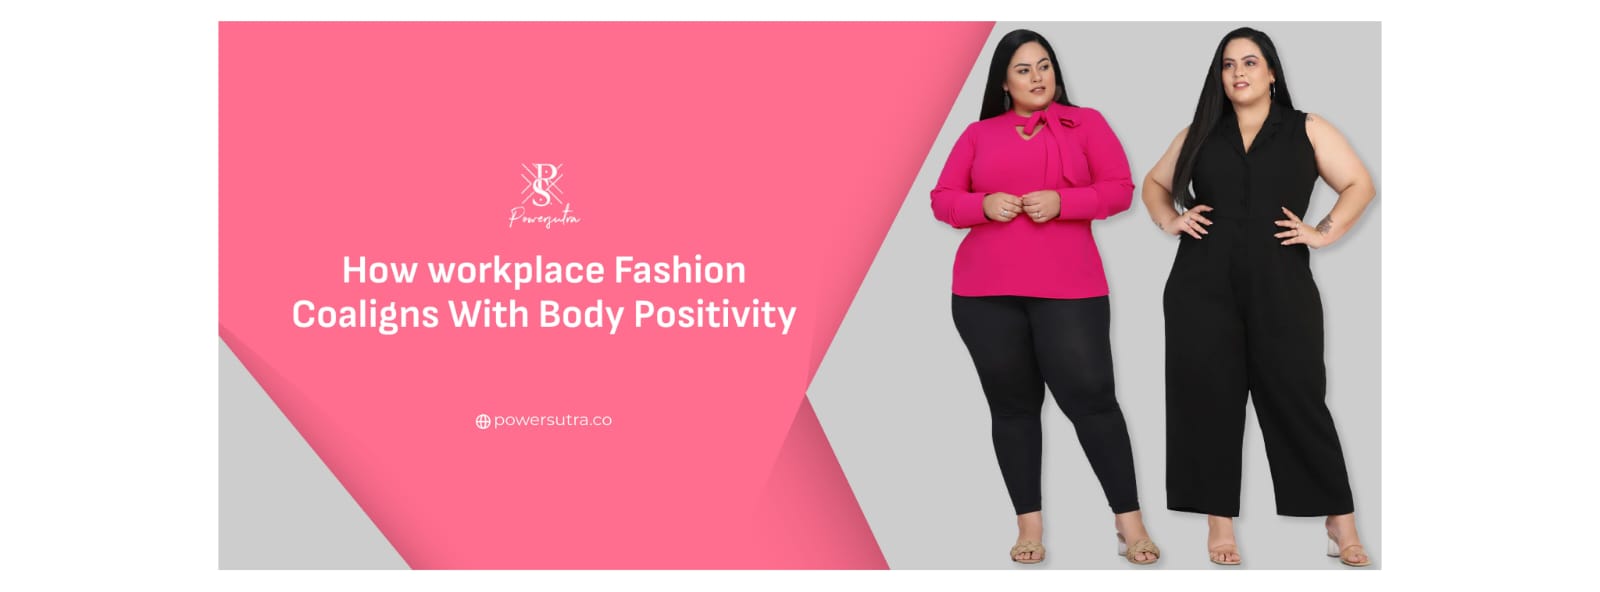 How workplace fashion coaligns with Body Positivity